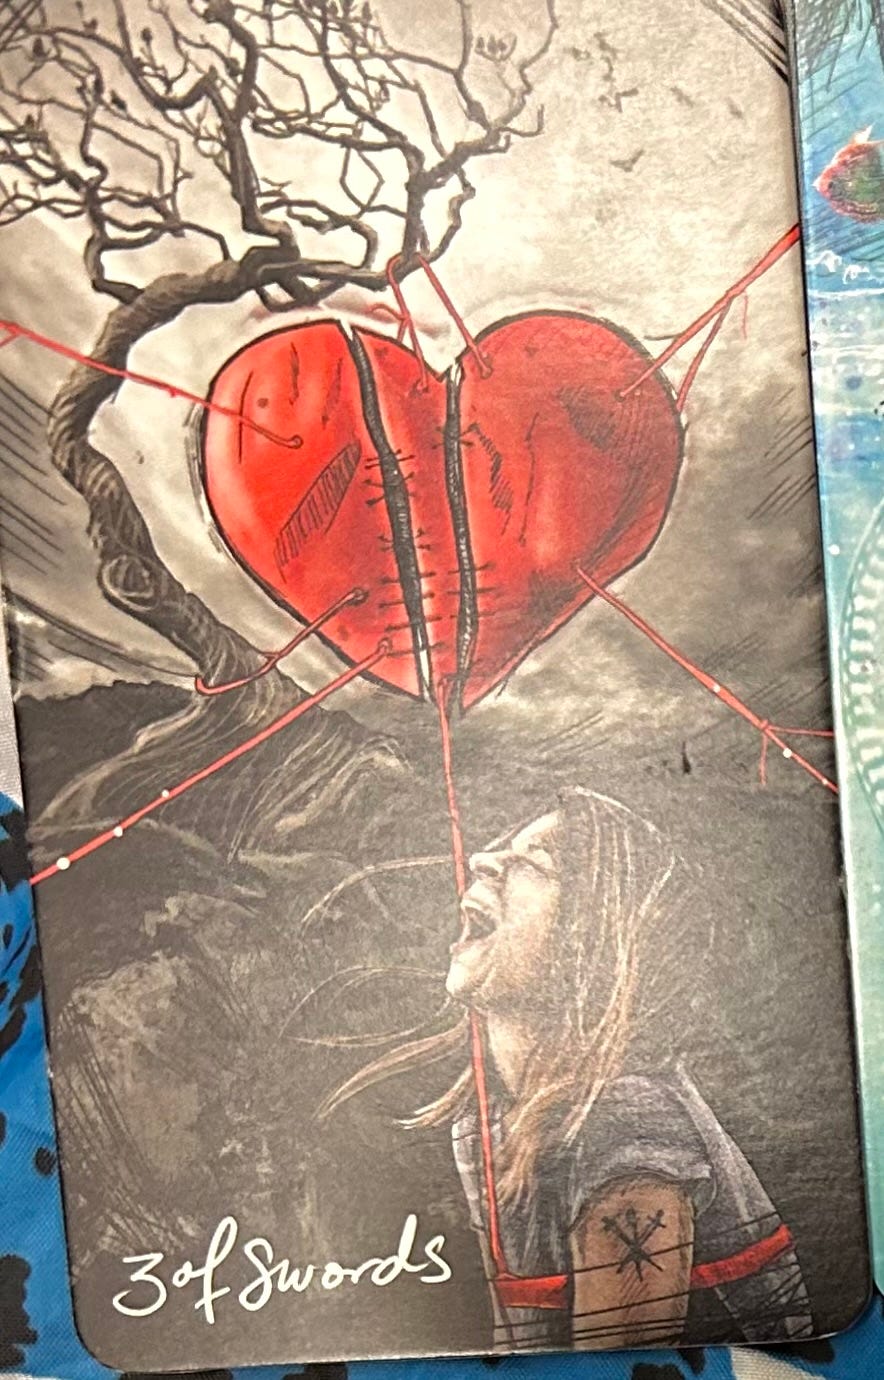 A large, red, stitched-together, broken heart hangs from a bare tree with a screaming person with long hair sitting underneath.